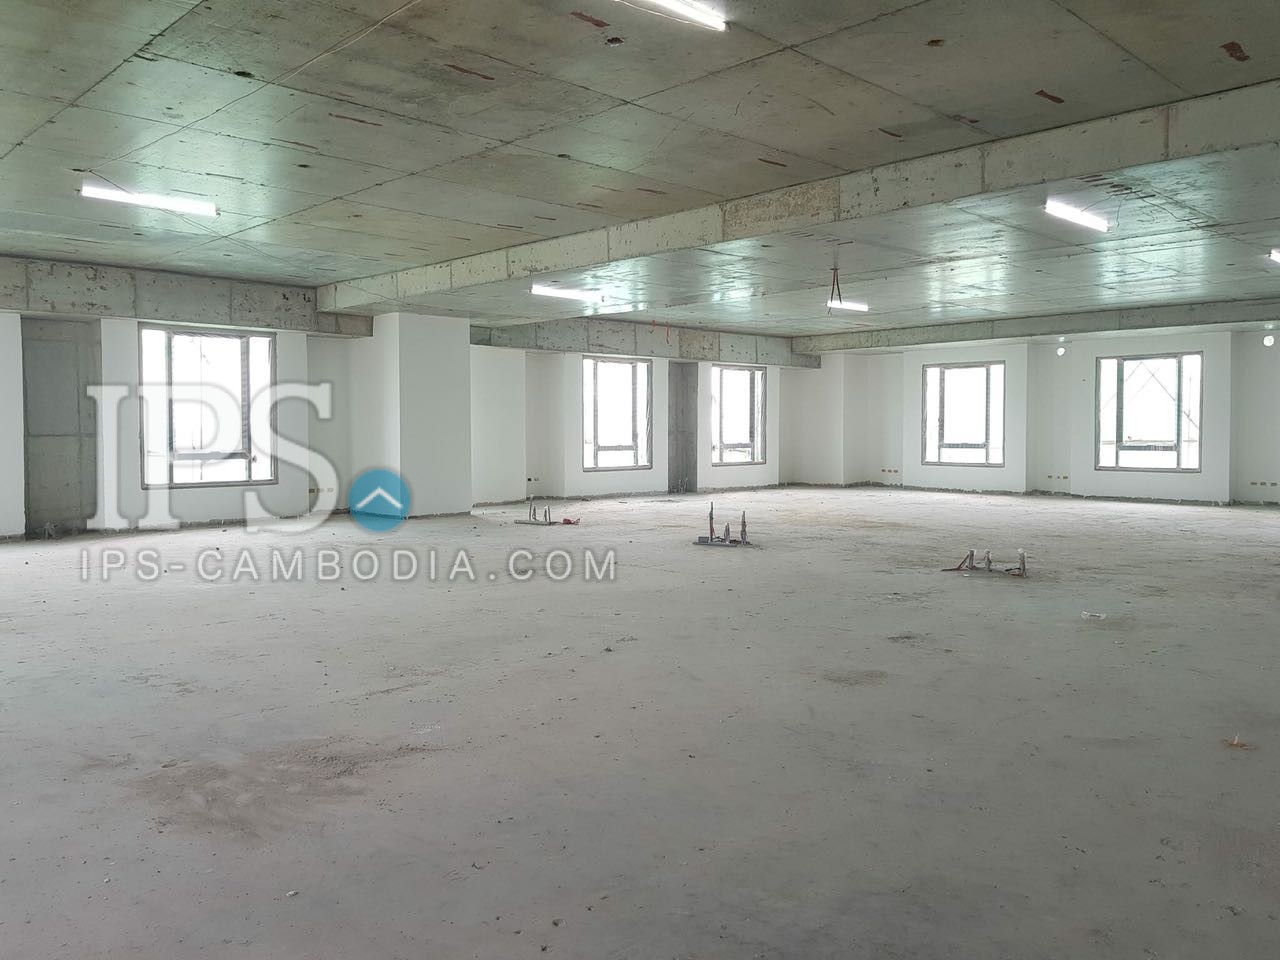 109 Sqm Premium Office Space For Rent Along Norodom Blvd.